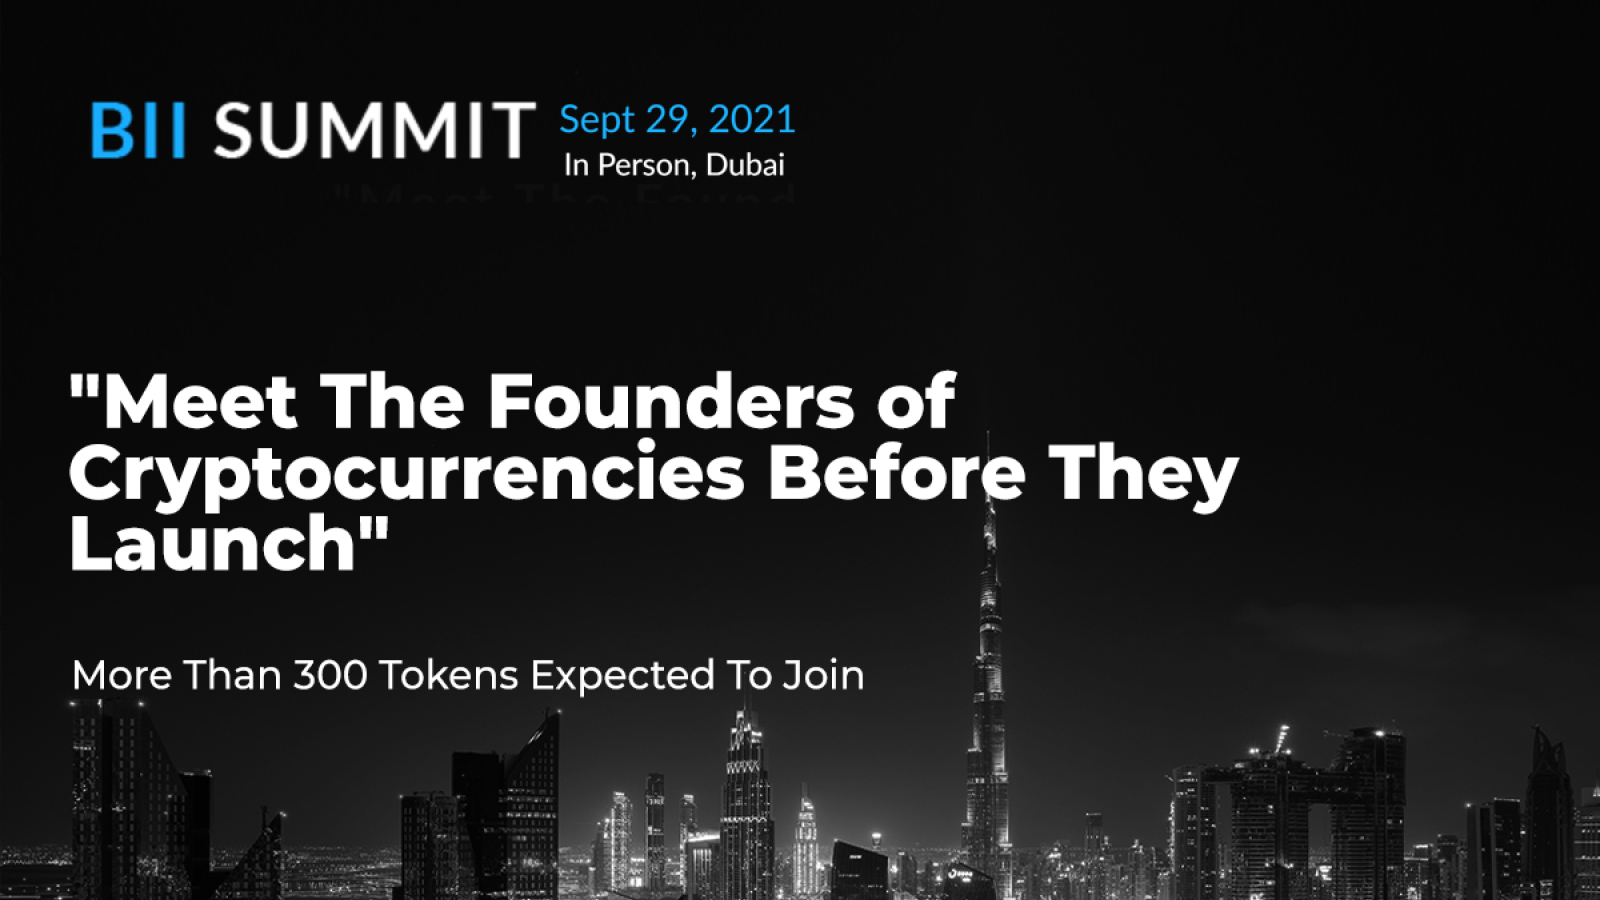 BII SUMMIT 2021 in Dubai: Meet the Founders of Cryptocurrencies Before They Launch